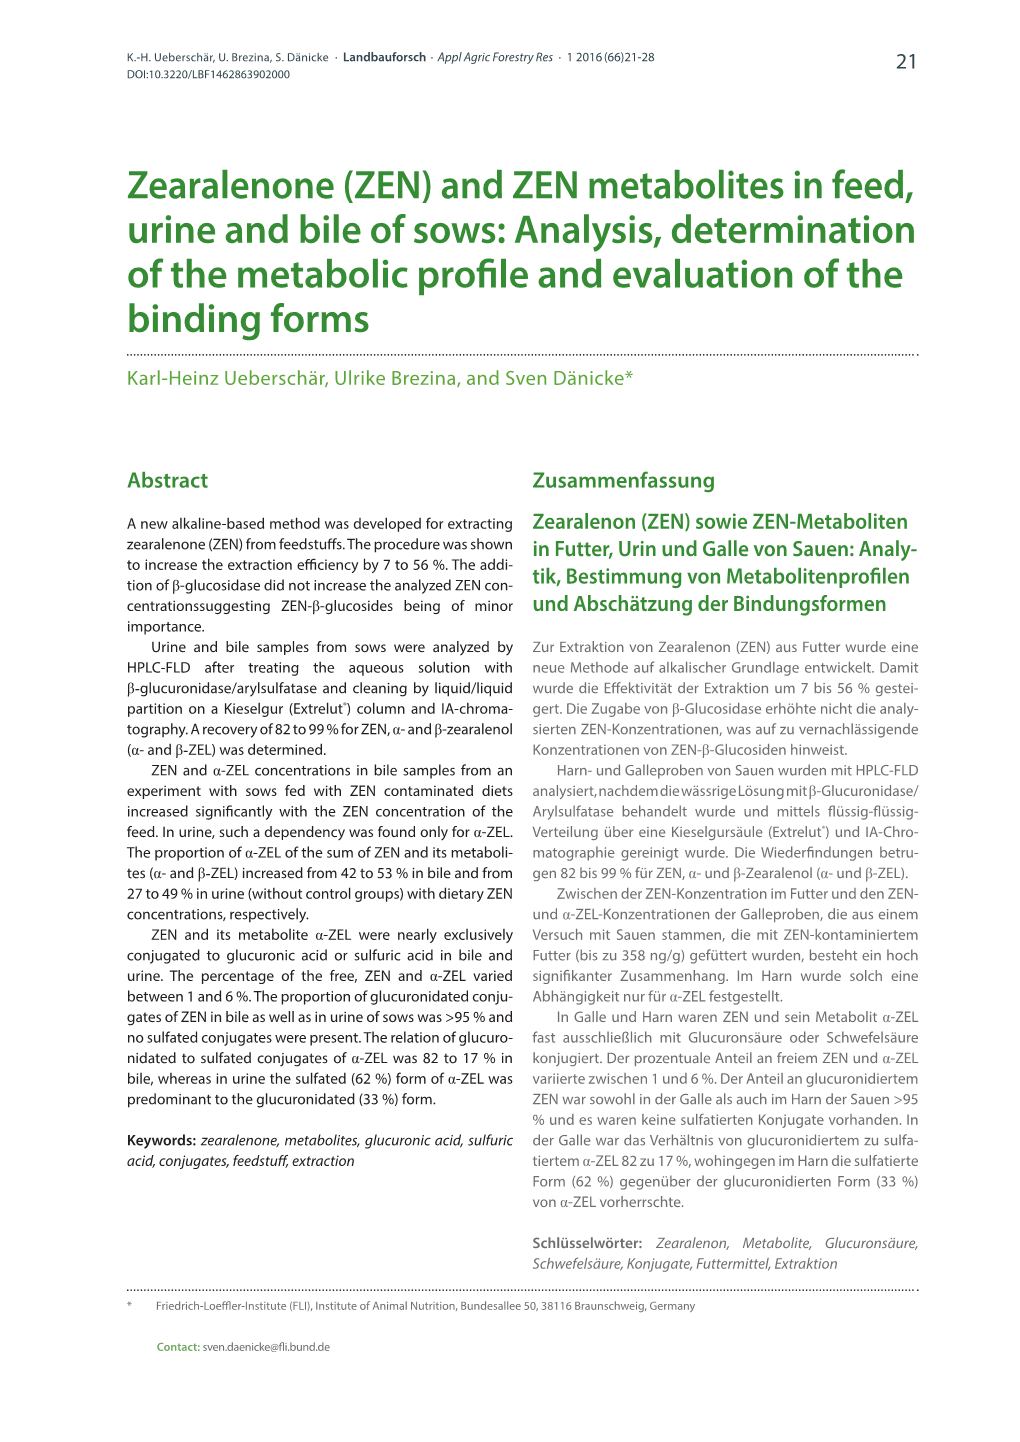 And ZEN Metabolites in Feed, Urine and Bile of Sows: Analysis, Determination of the Metabolic Profile and Evaluation of the Binding Forms